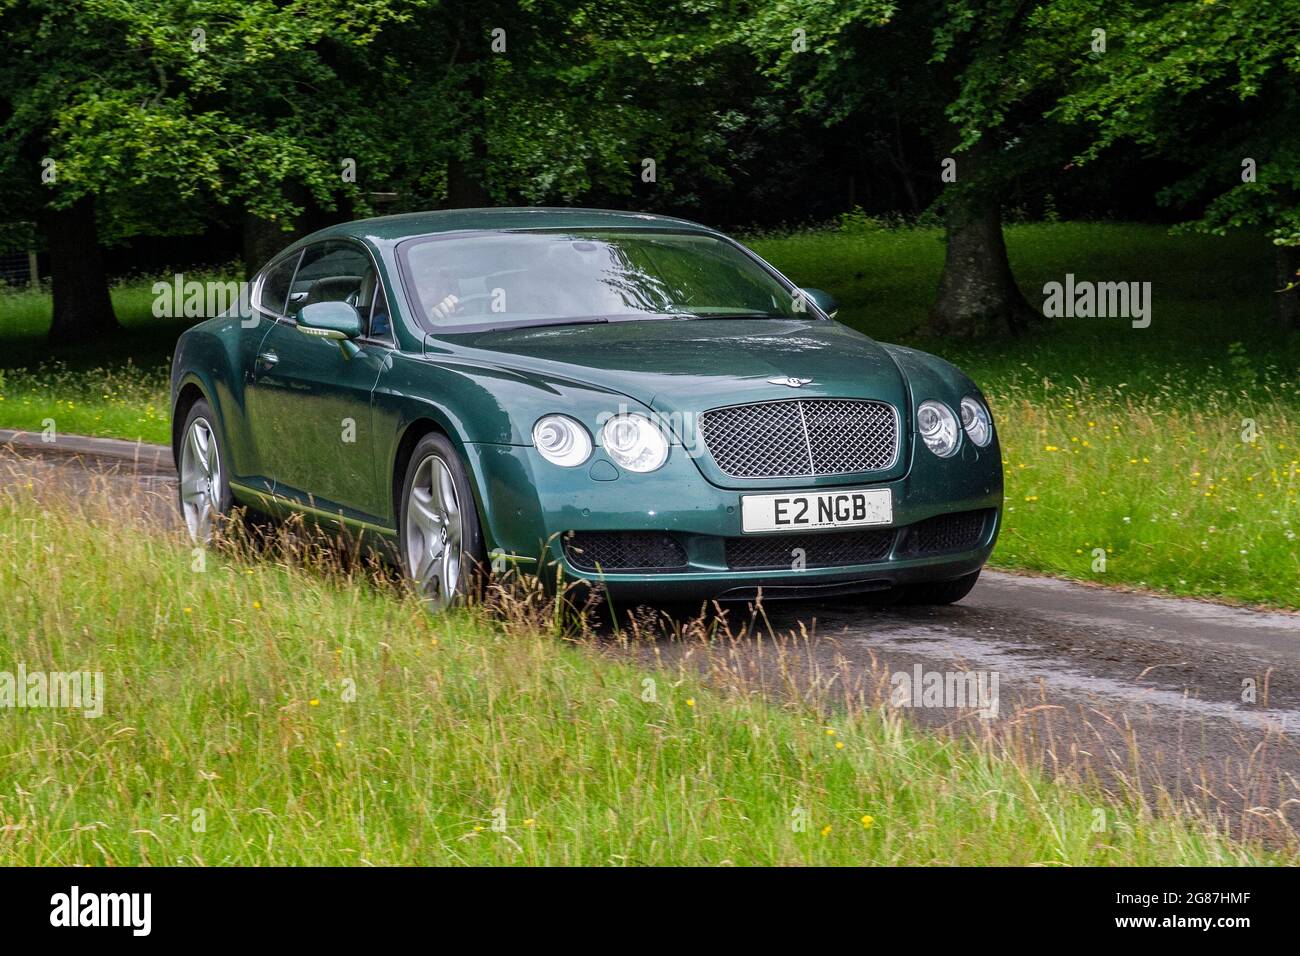 A Green Bentley Continental Gt Auto Car Coupe at ‘The Cars the Star Show” in Holker Hall & Gardens, Grange-over-Sands, UK Stock Photo